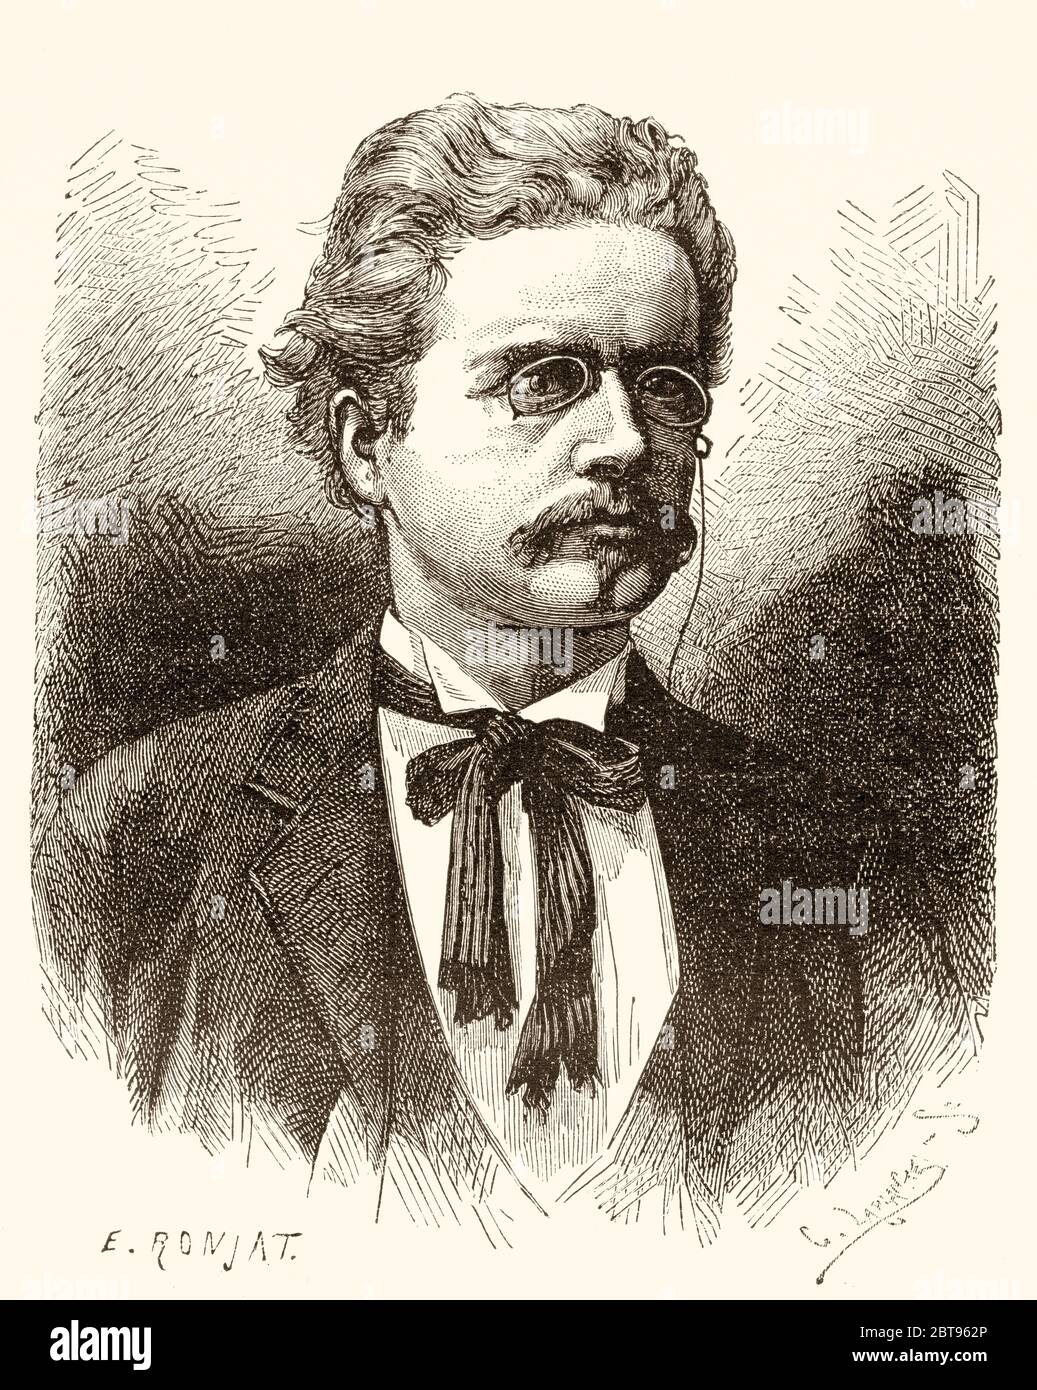 Portrait of Johan Hjalmar Theel (1848 - 1937) was a Swedish university professor and zoologist. Europe, 19th century Old engraving illustration trip to the North Pole, from Novaya Zemlya to Yenisei river by Adolf Erik Nordenskiold 1875 Stock Photo